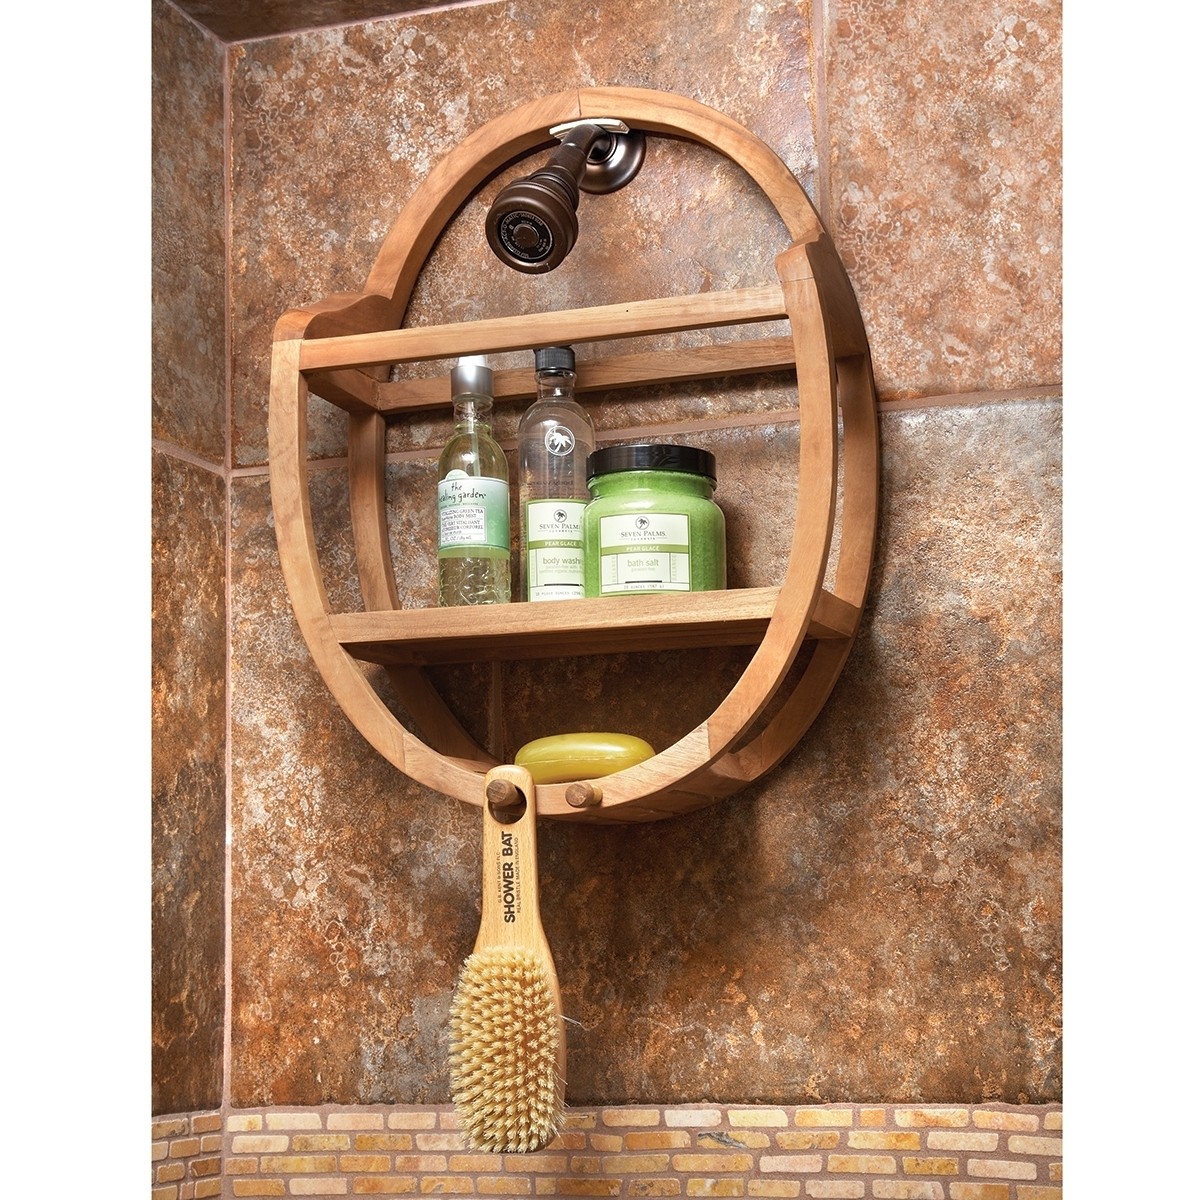 Teak shower caddy takes you to the actual freshness